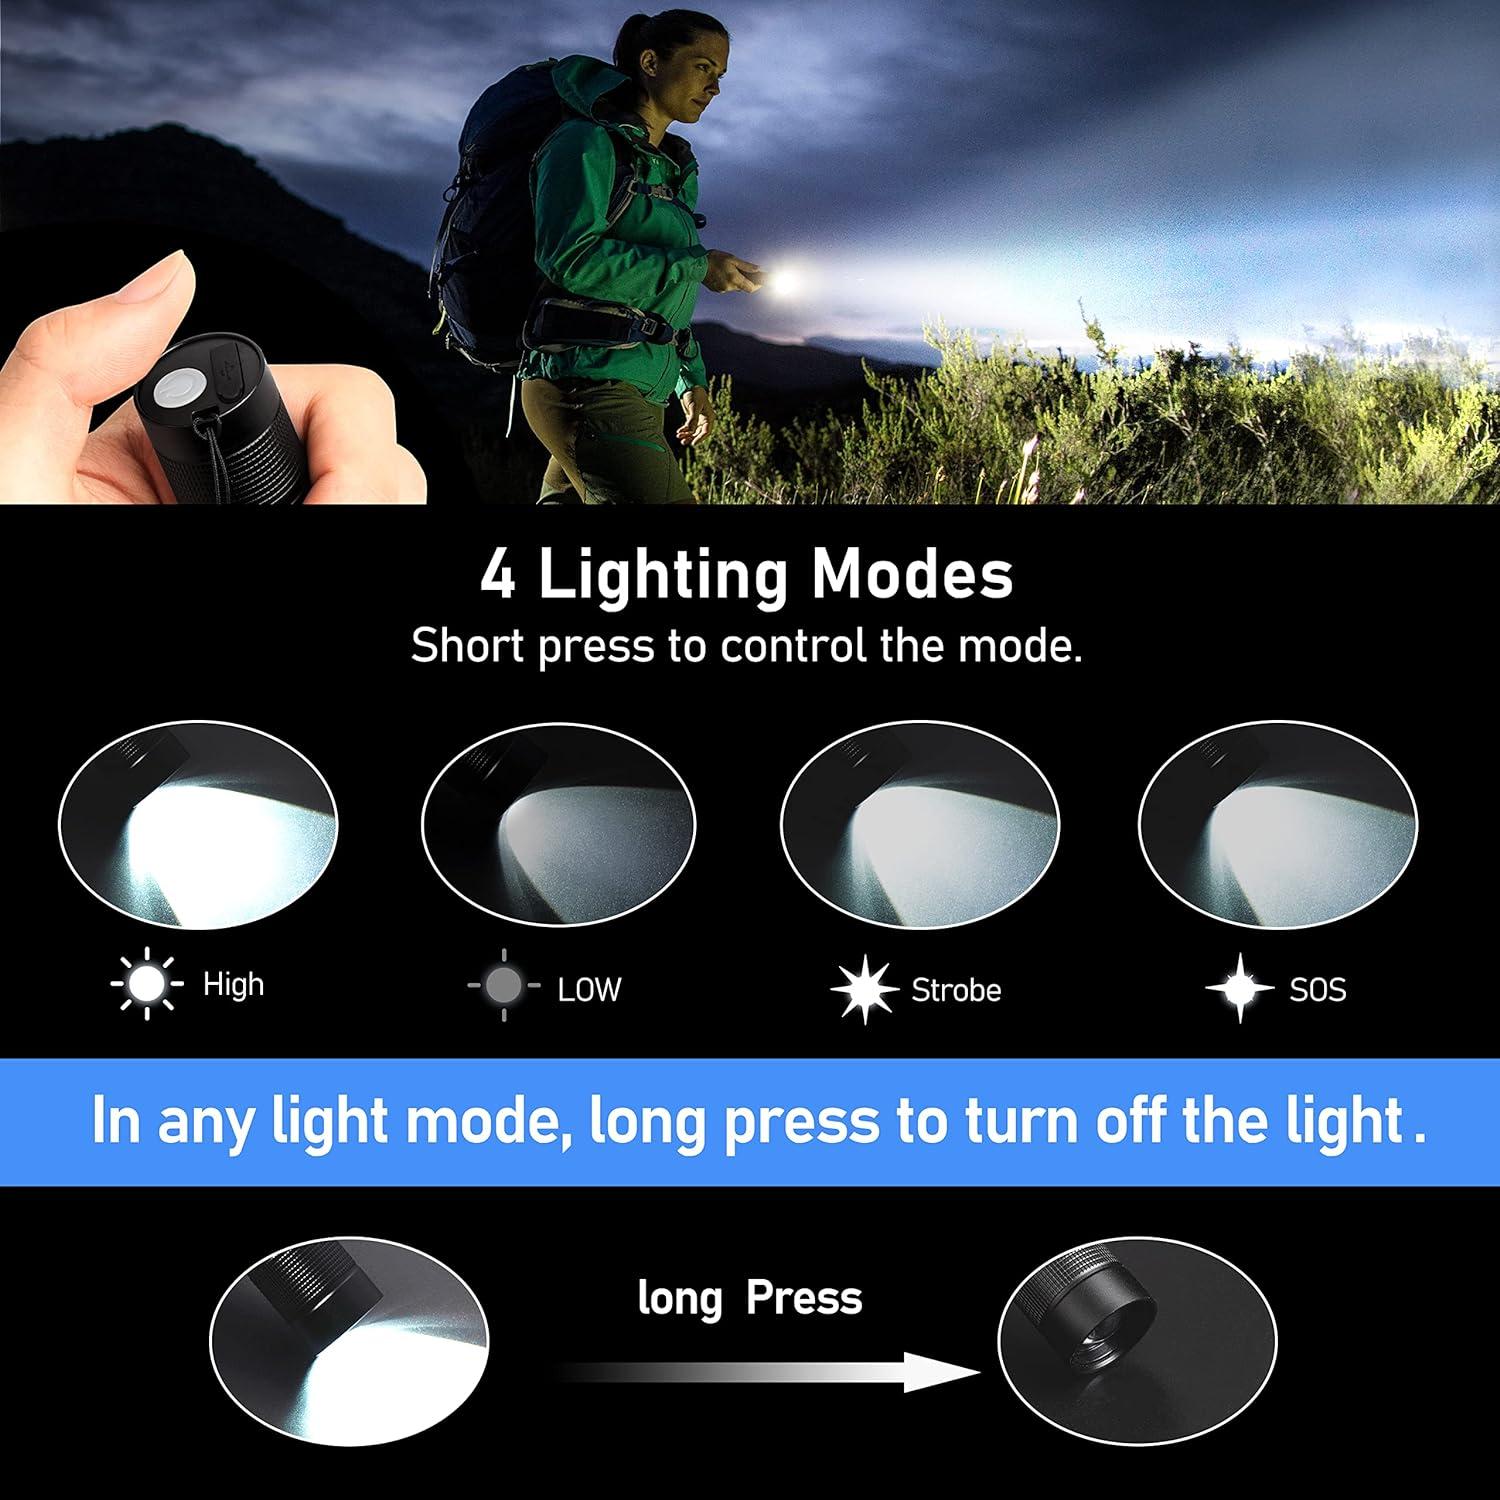 Blukar LED Camping Lamp - Waterproof, Portable, Rechargeable -  www.